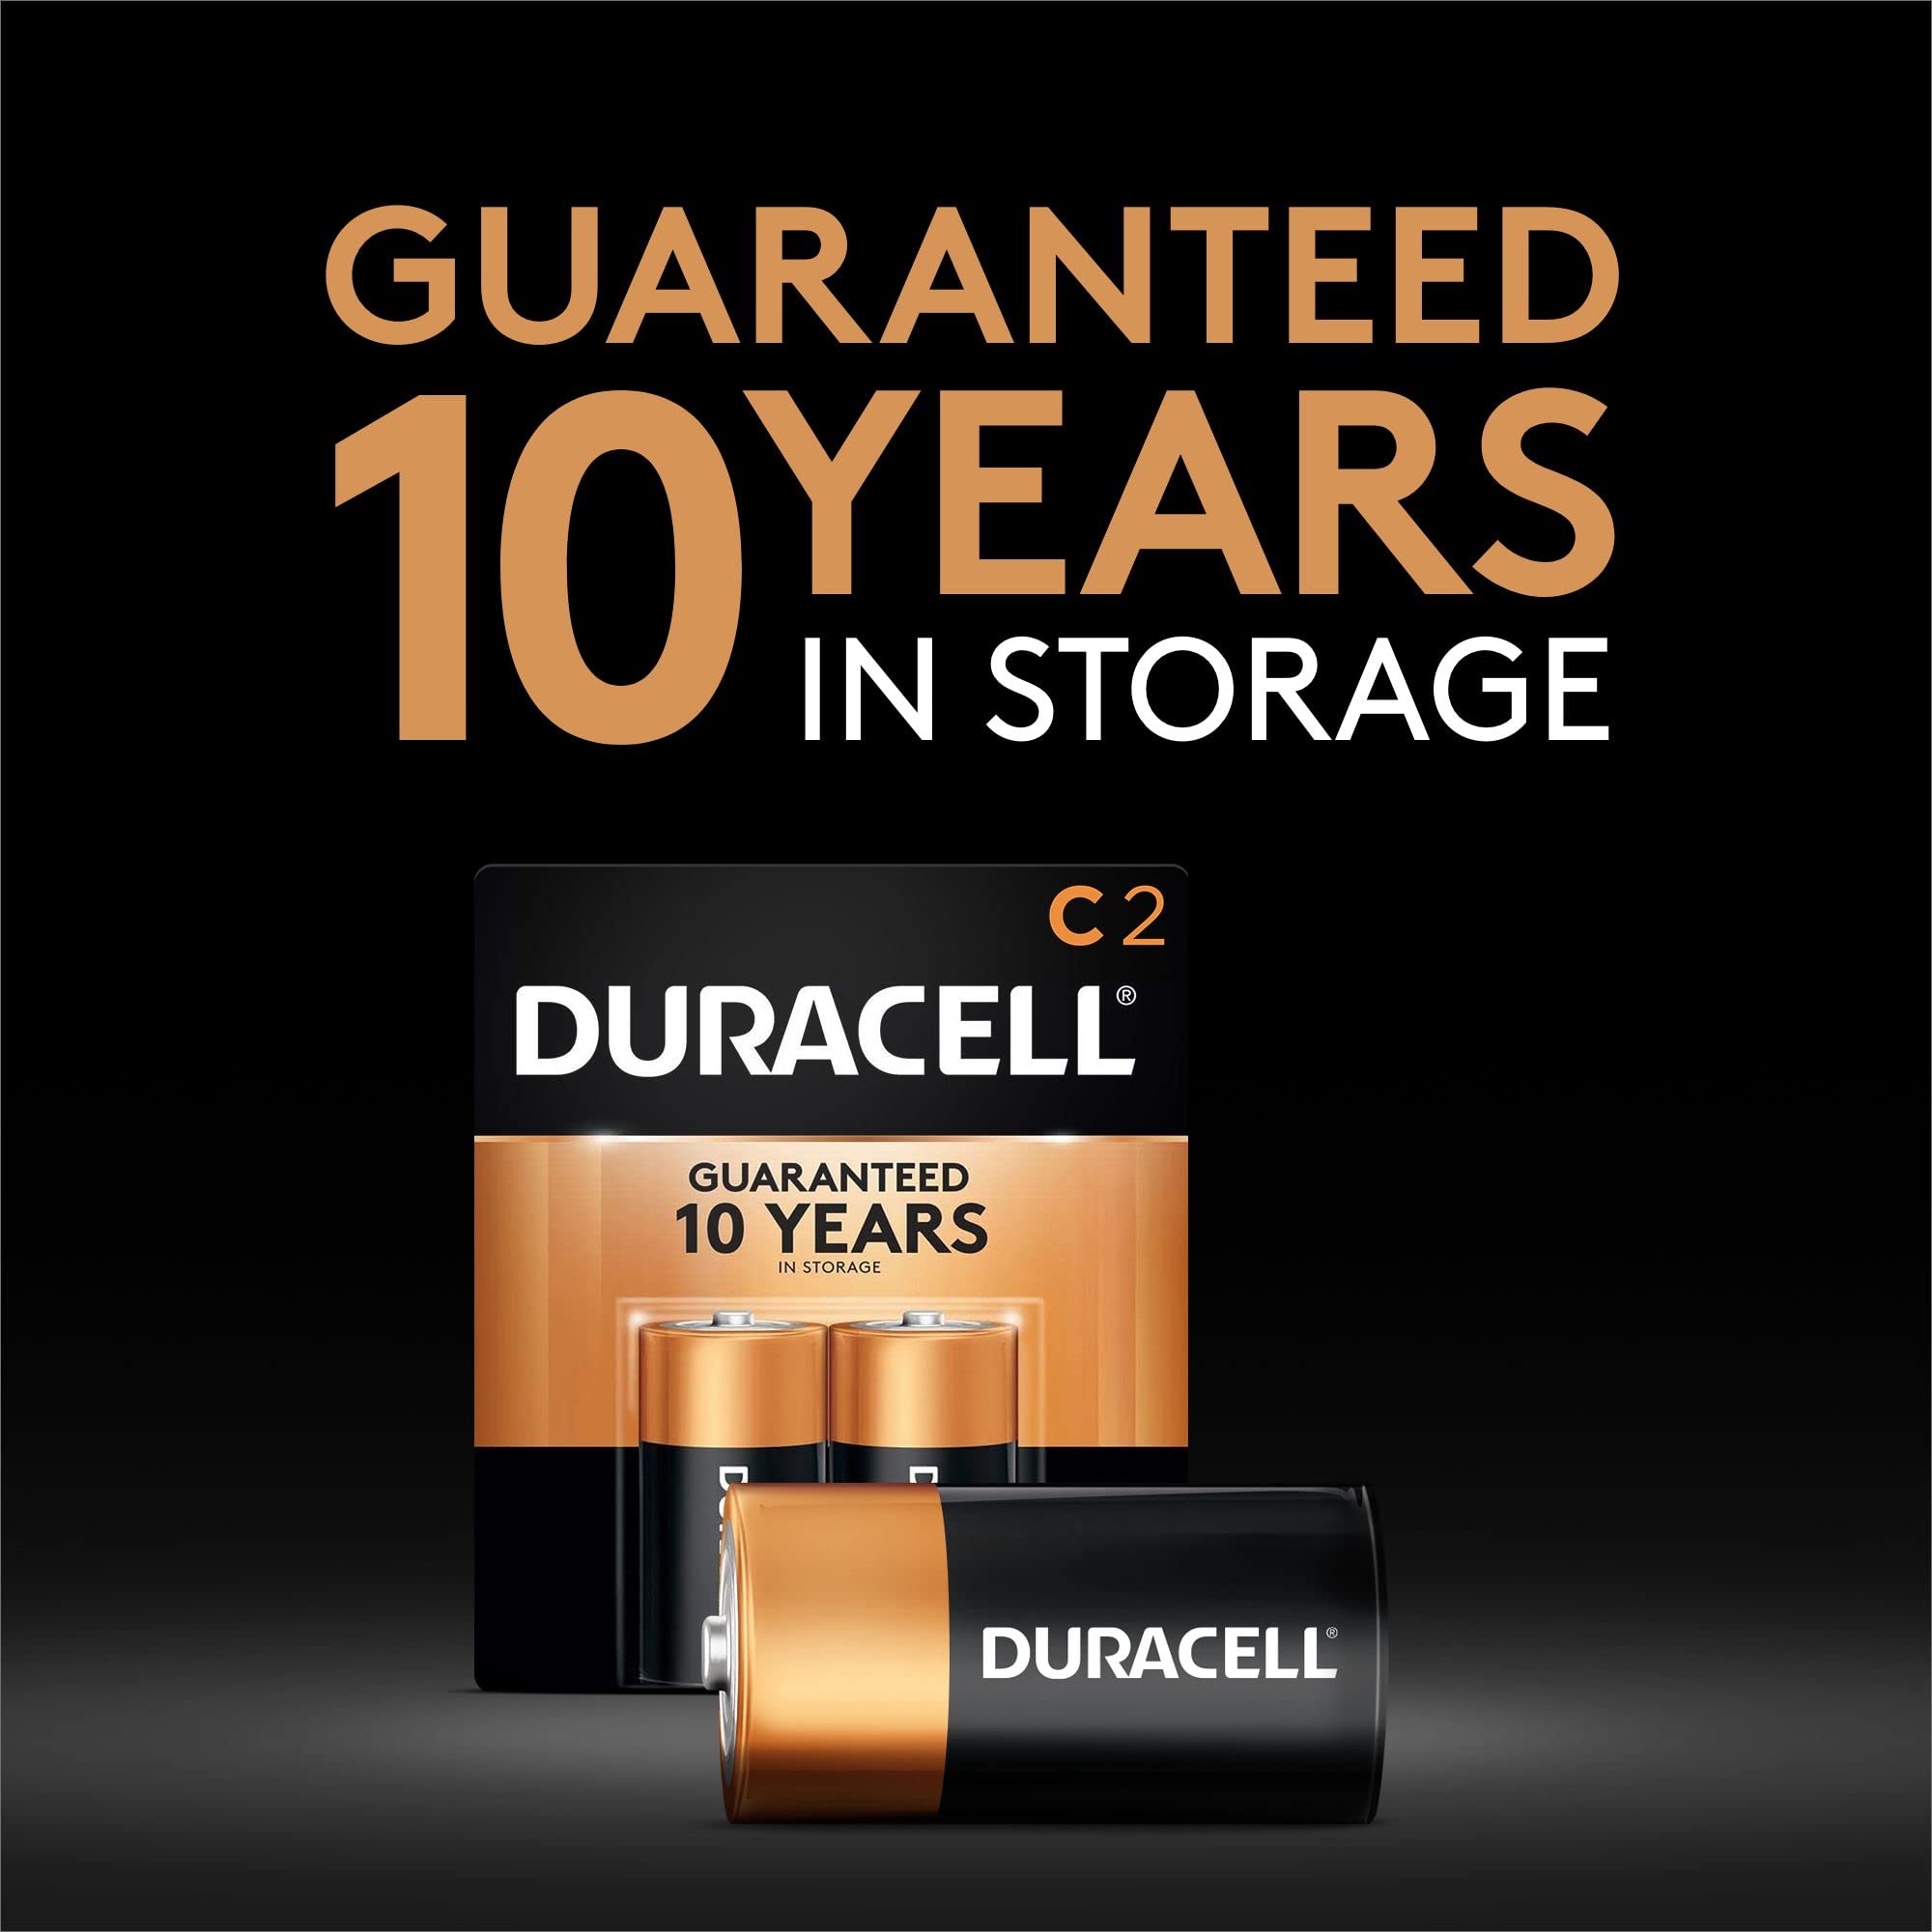 DURACELL Coppertop 1.5V Size C Alkaline Battery, (Pack of 16) - image 3 of 5